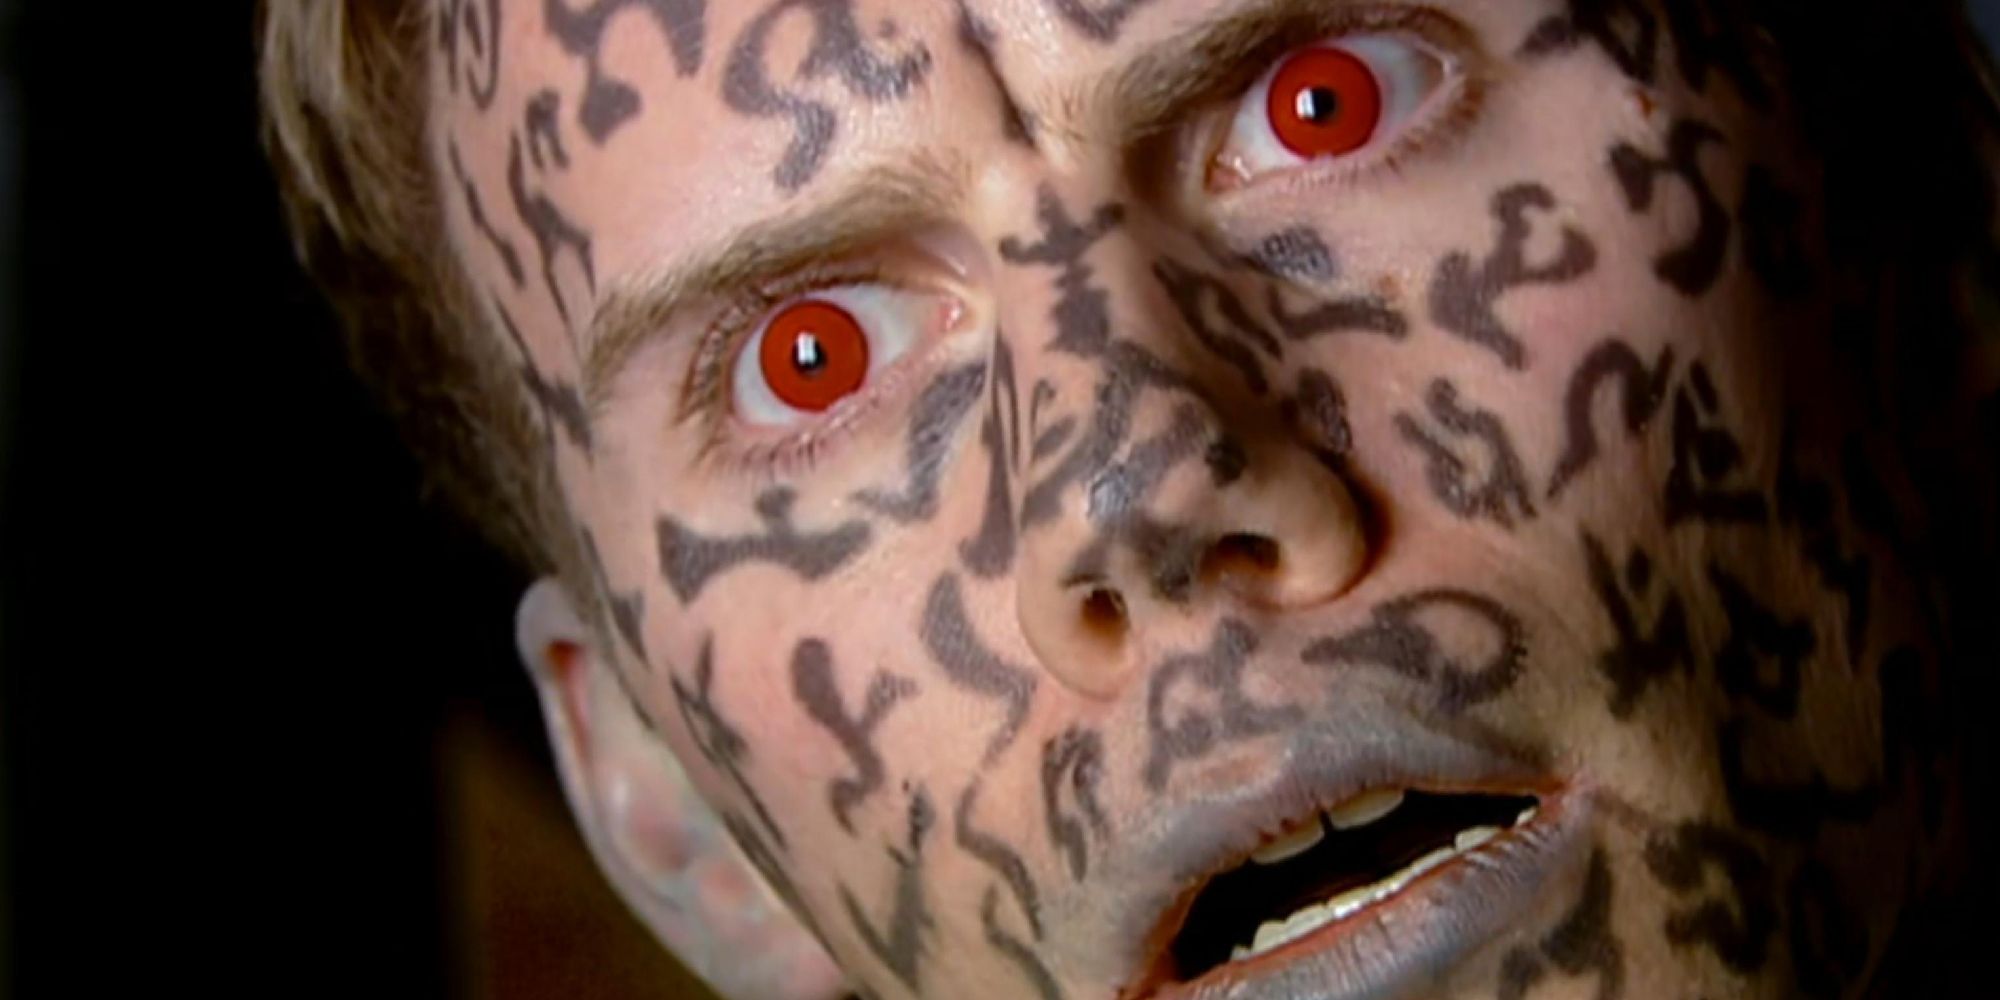 Toby with red eyes and demonic markings over his face in Doctor Who's The Impossible Planet